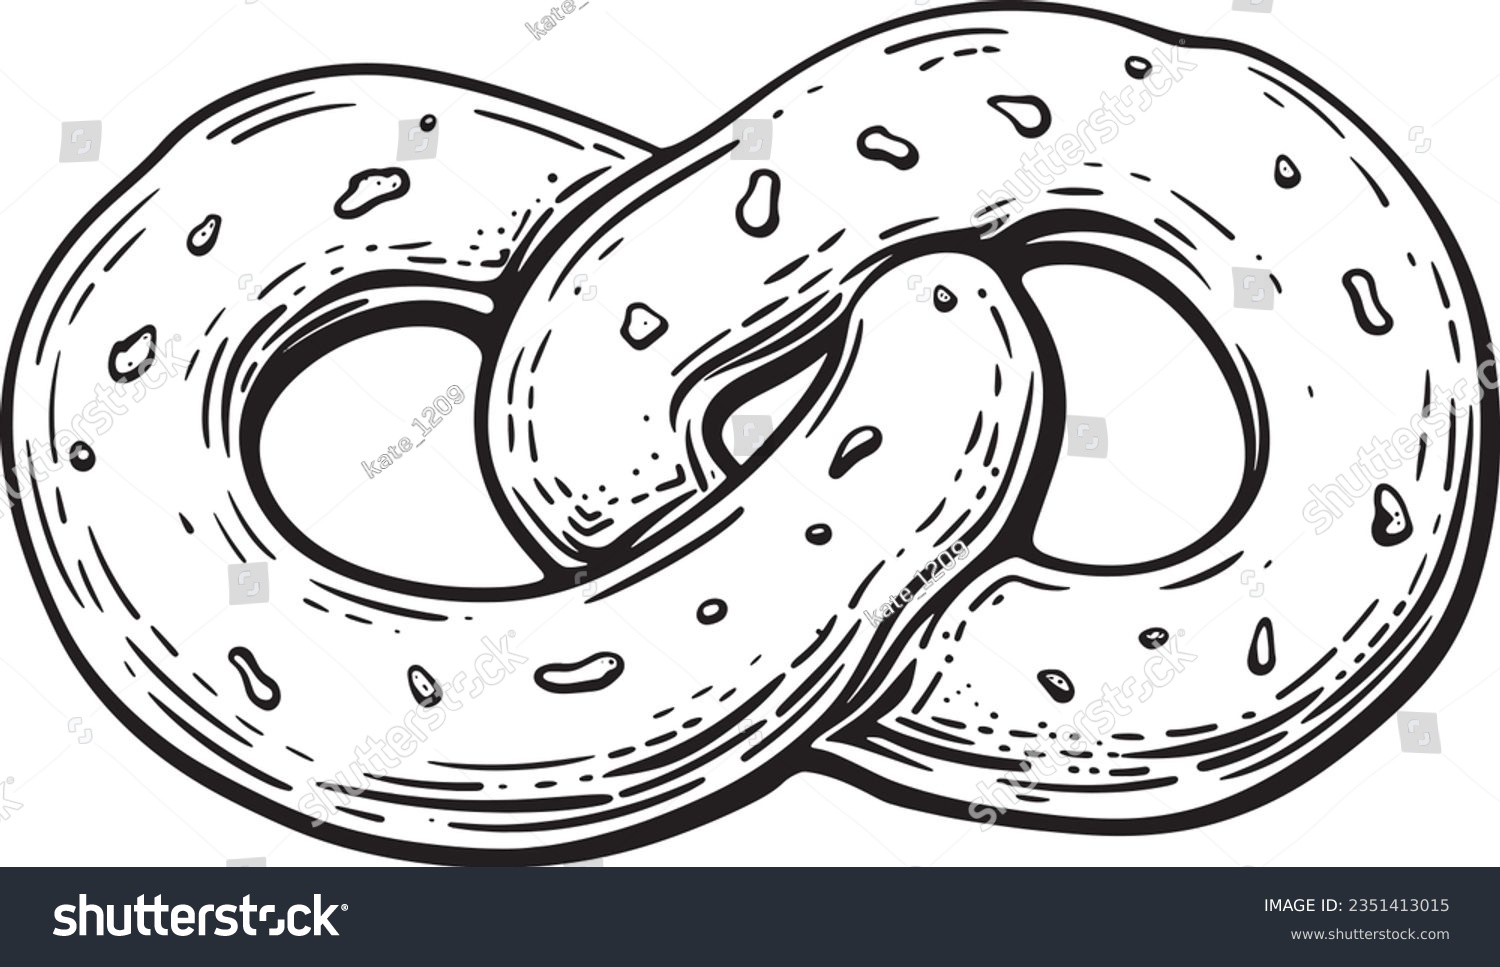 SVG of Pretzel engraving style, Basic simple Minimalist vector SVG logo graphic, isolated on white background, children's coloring page, outline art, thick crisp lines, black and white svg